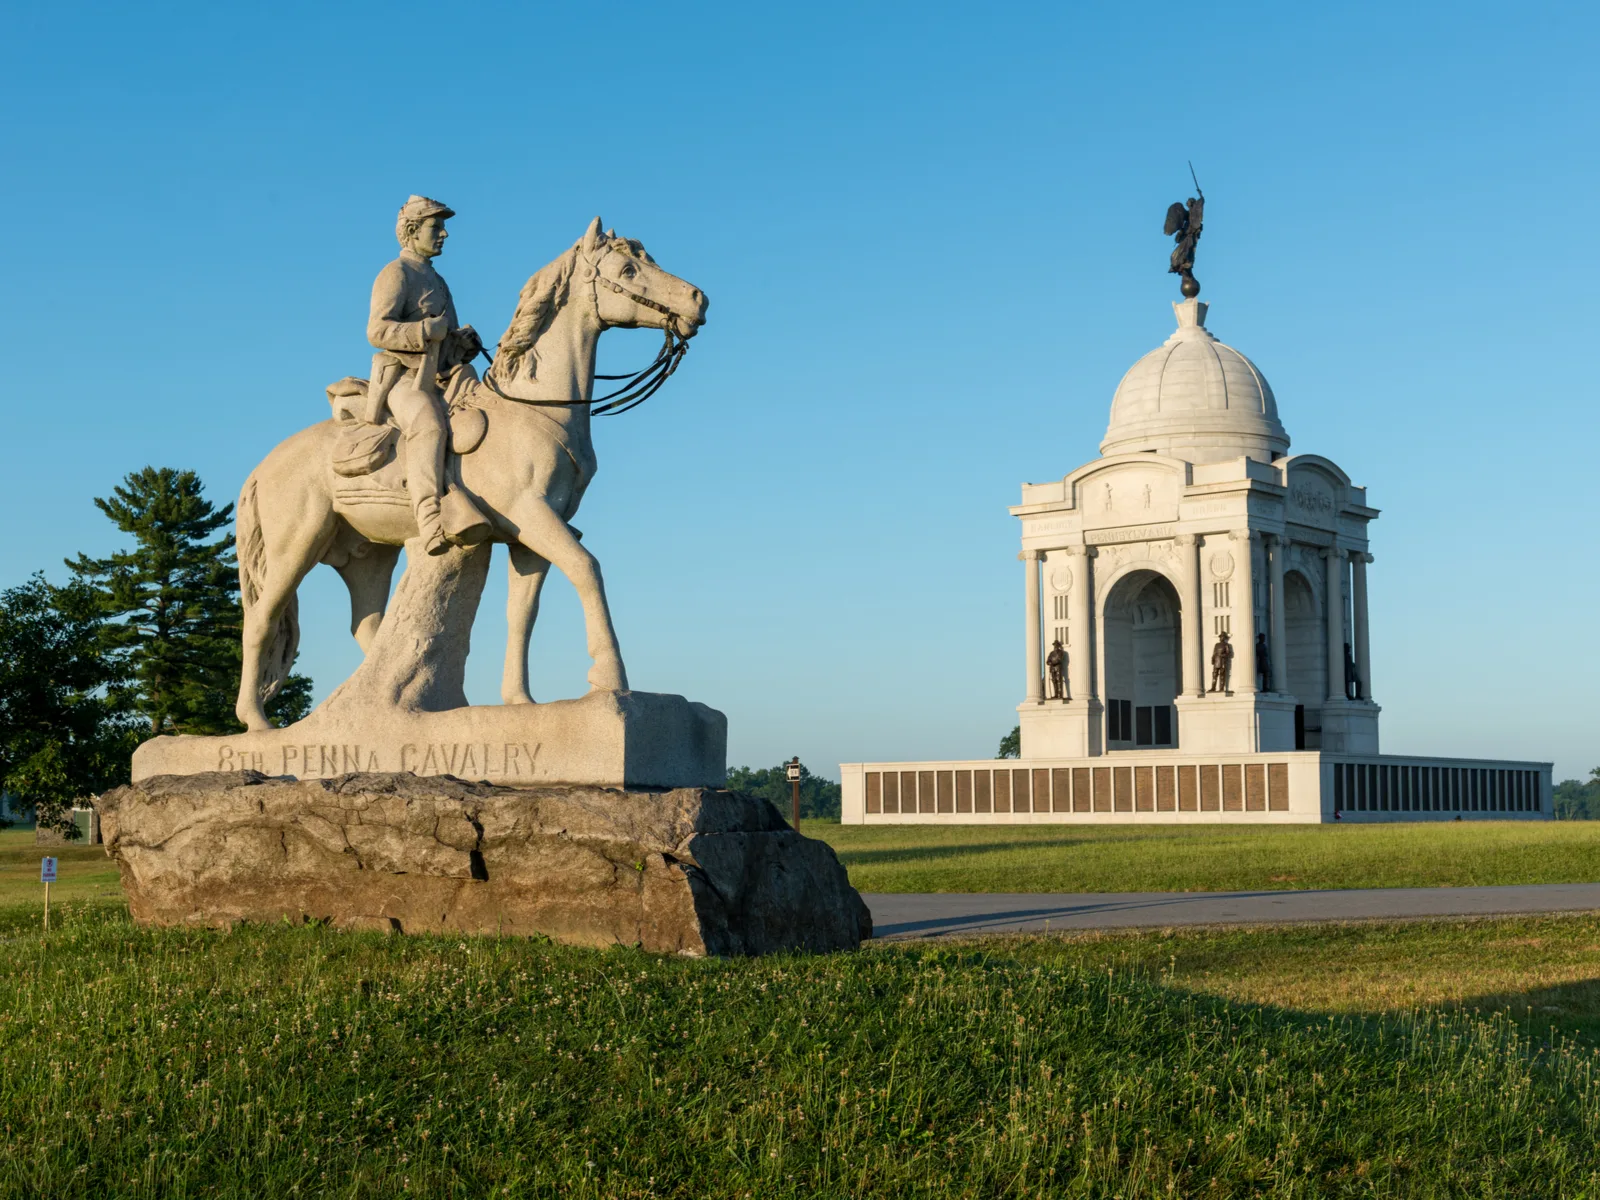 The historic Cavalry Statue standing in front of the Pennsylvania State Monument pictured during a clear day as a piece on the best things to do in Pennsylvania